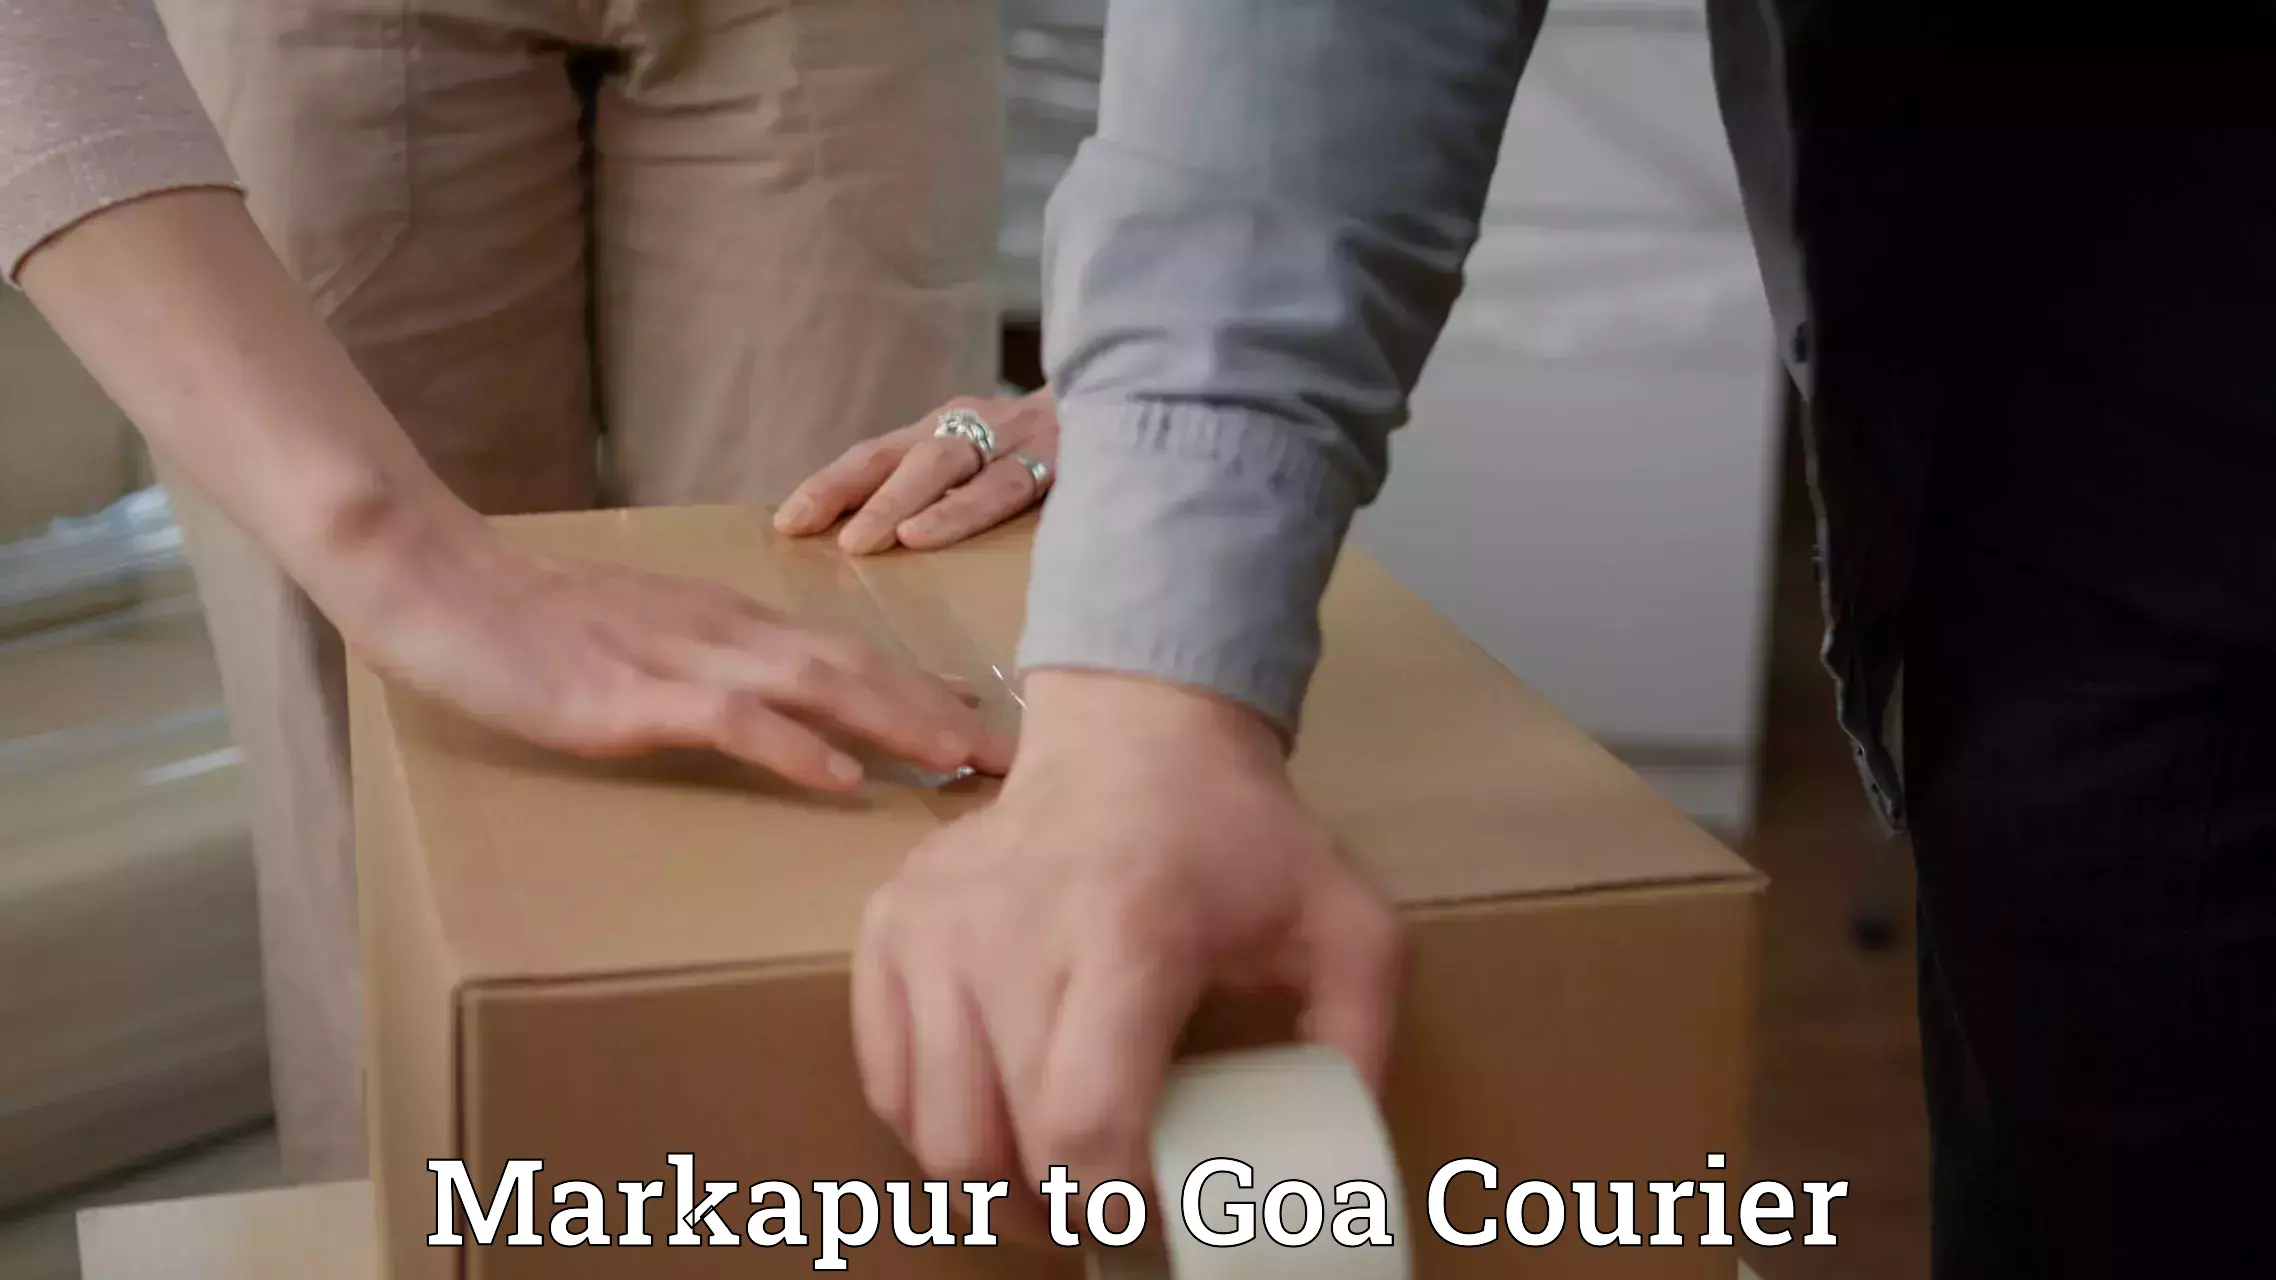 Courier service partnerships Markapur to South Goa